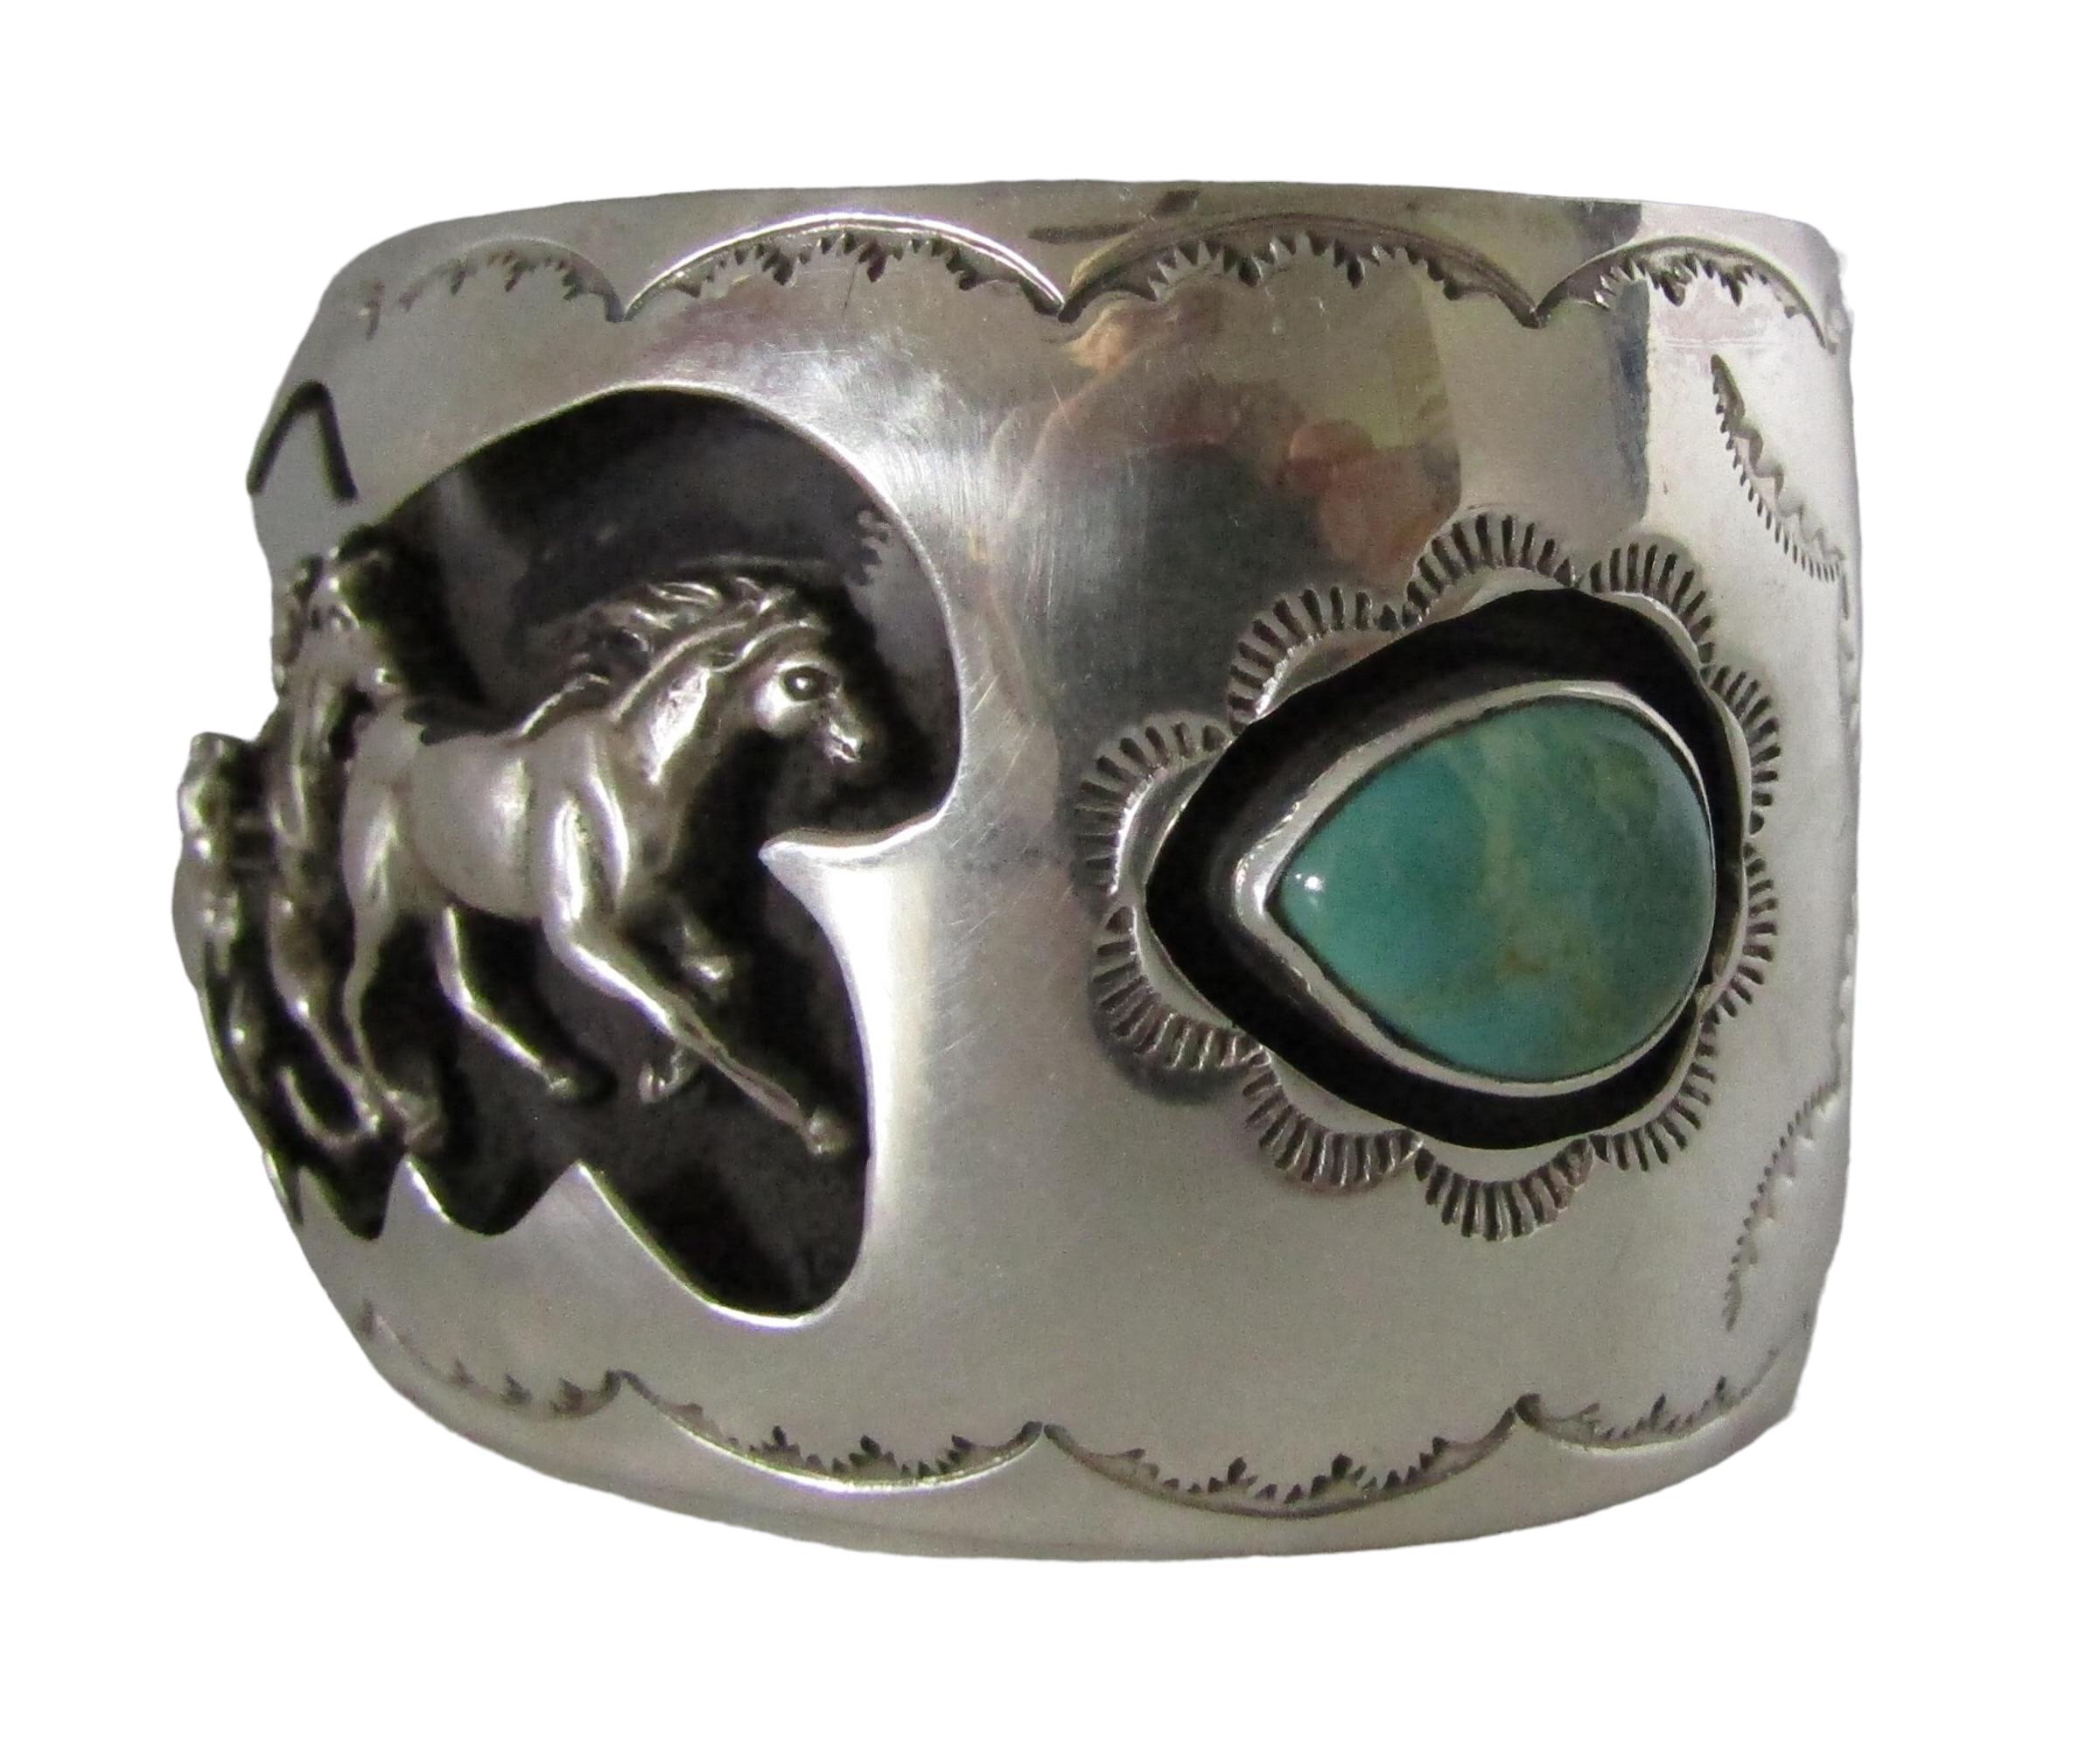 This Navajo Cuff was created by master silversmith Tim Yazzie, who draws all of designs free-hand on the silver. His running horses design evokes a sense of Strength, protection, guidance, freedom and spirit. It's impeccable. The cuff is signed T.